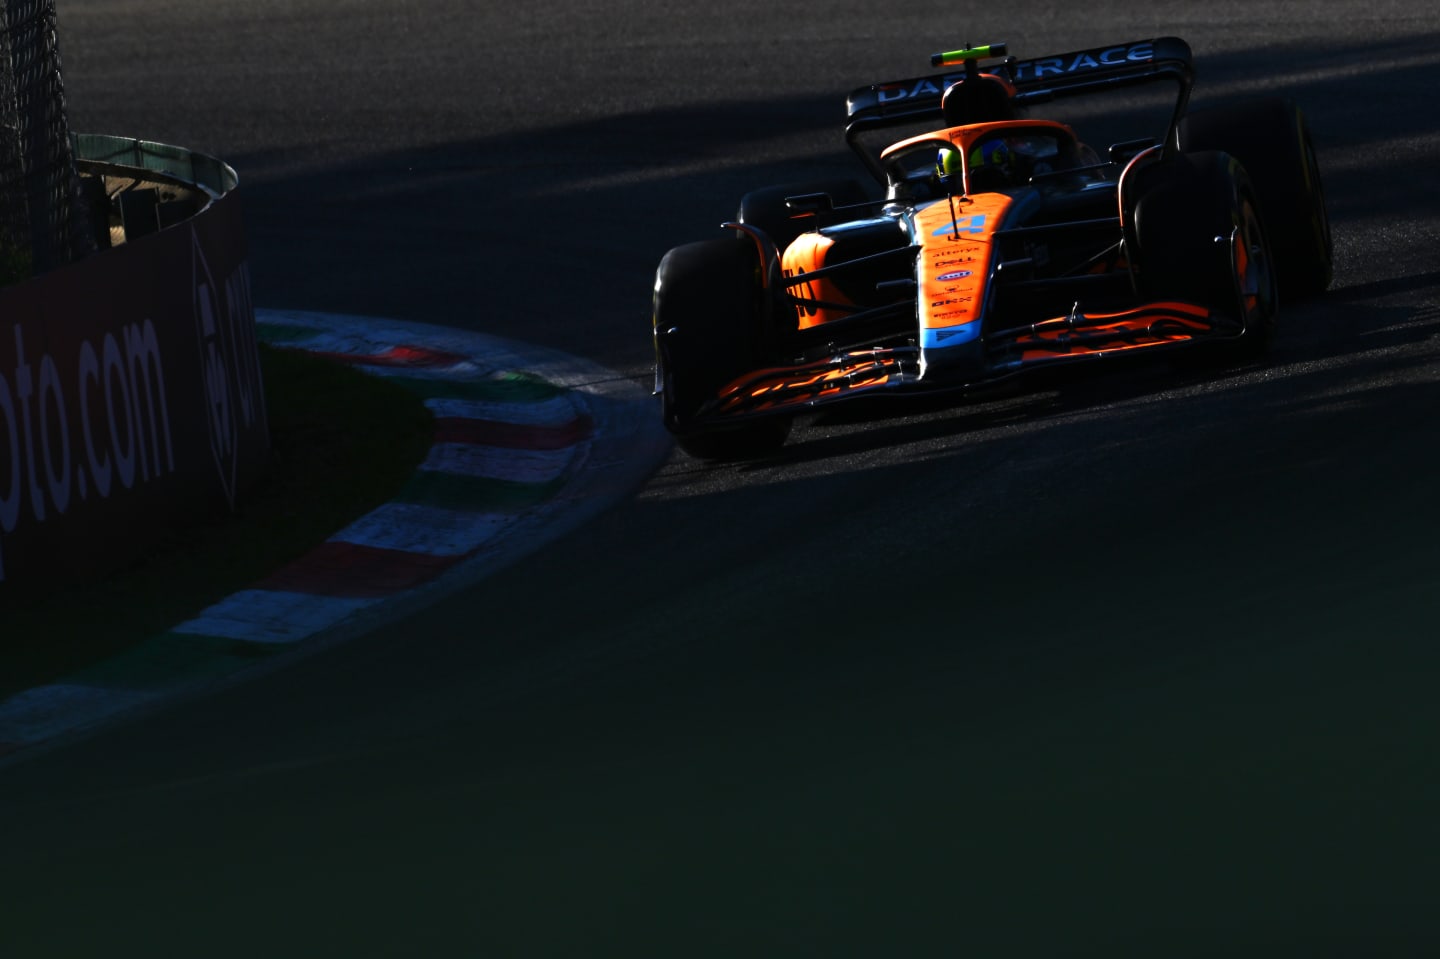 MONZA, ITALY - SEPTEMBER 09: Lando Norris of Great Britain driving the (4) McLaren MCL36 Mercedes on track during practice ahead of the F1 Grand Prix of Italy at Autodromo Nazionale Monza on September 09, 2022 in Monza, Italy. (Photo by Clive Mason/Getty Images)